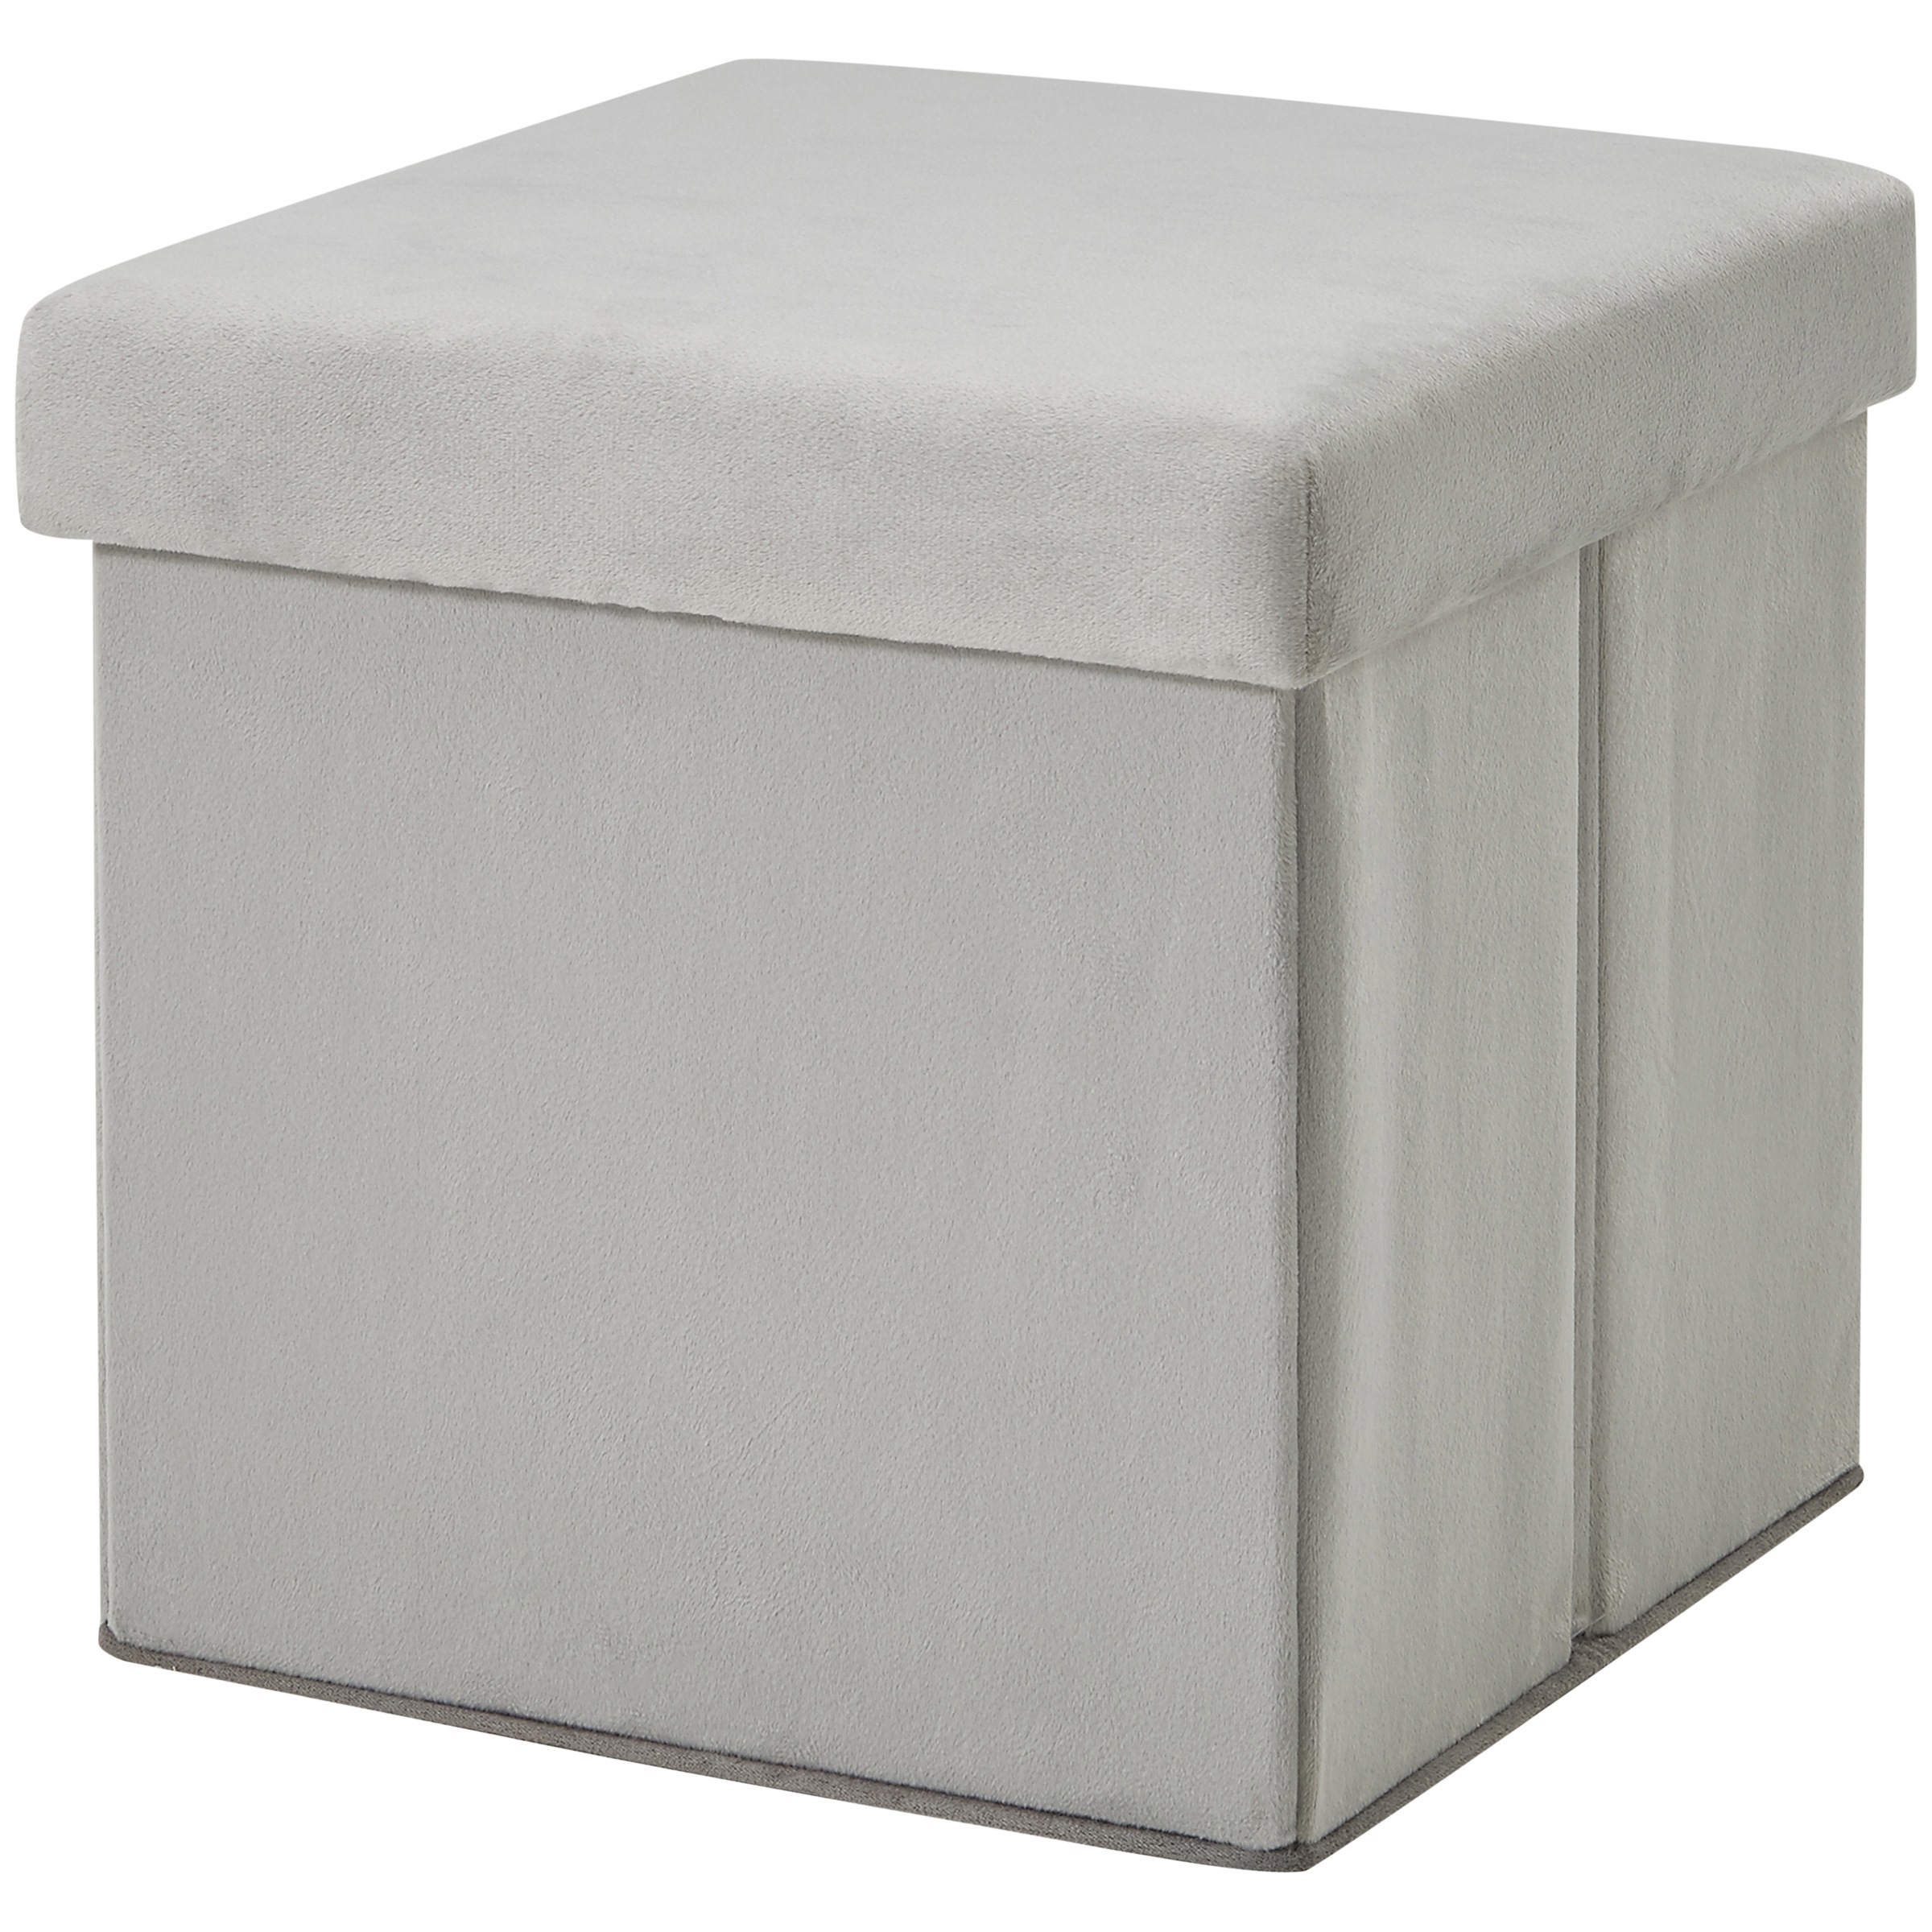 Mainstays Ultra Collapsible Storage Ottoman, Gray Faux Suede - image 2 of 6